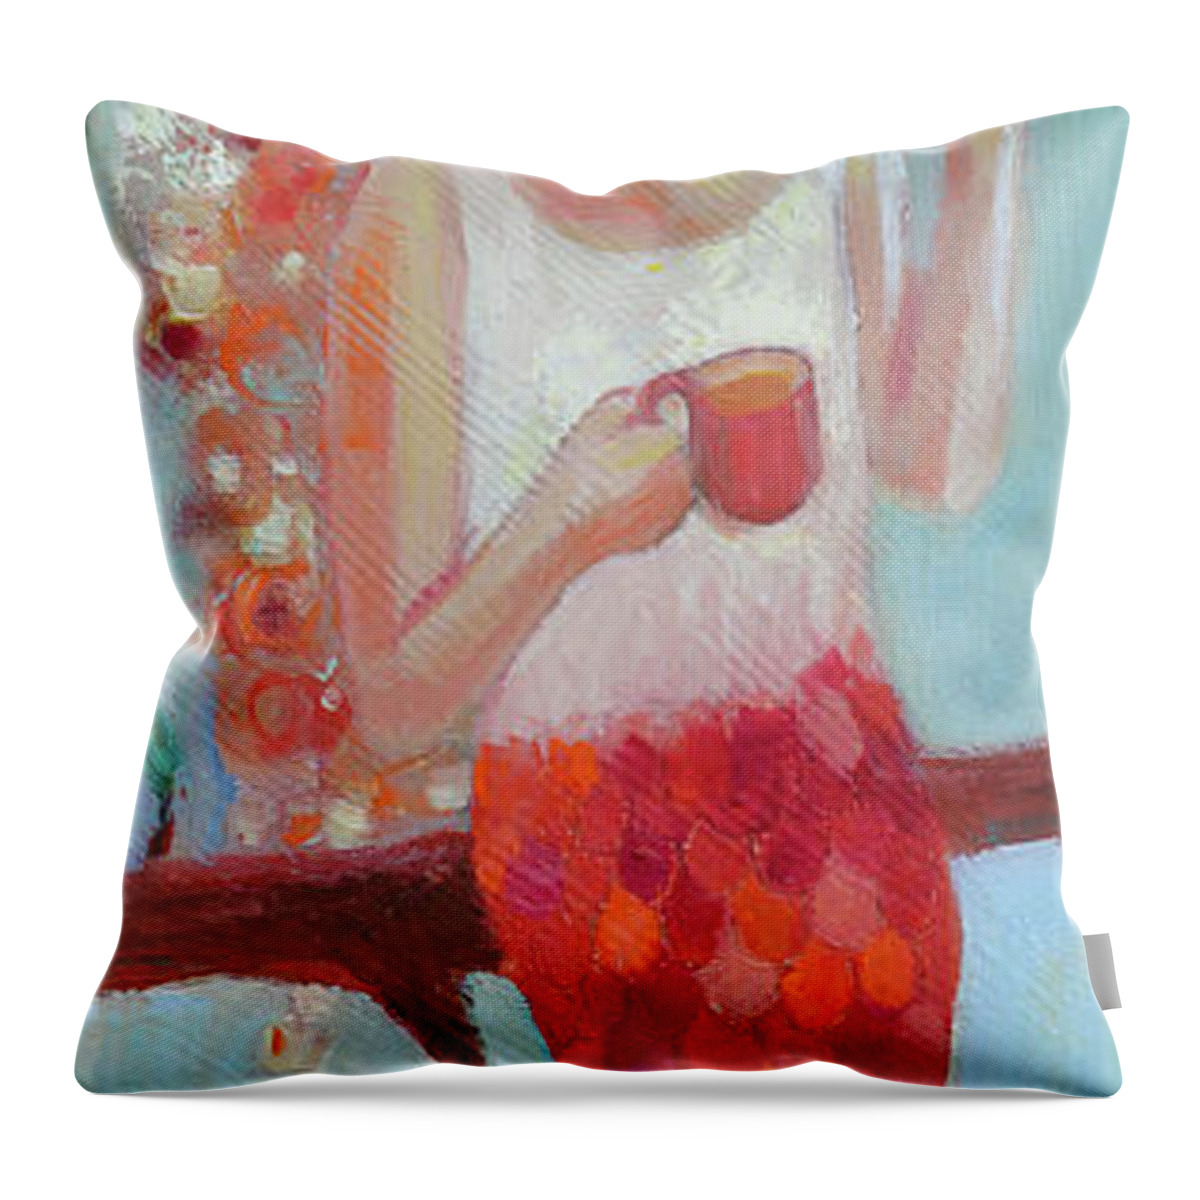 Mermaid Throw Pillow featuring the painting Mermaid On A Tree by Manami Lingerfelt